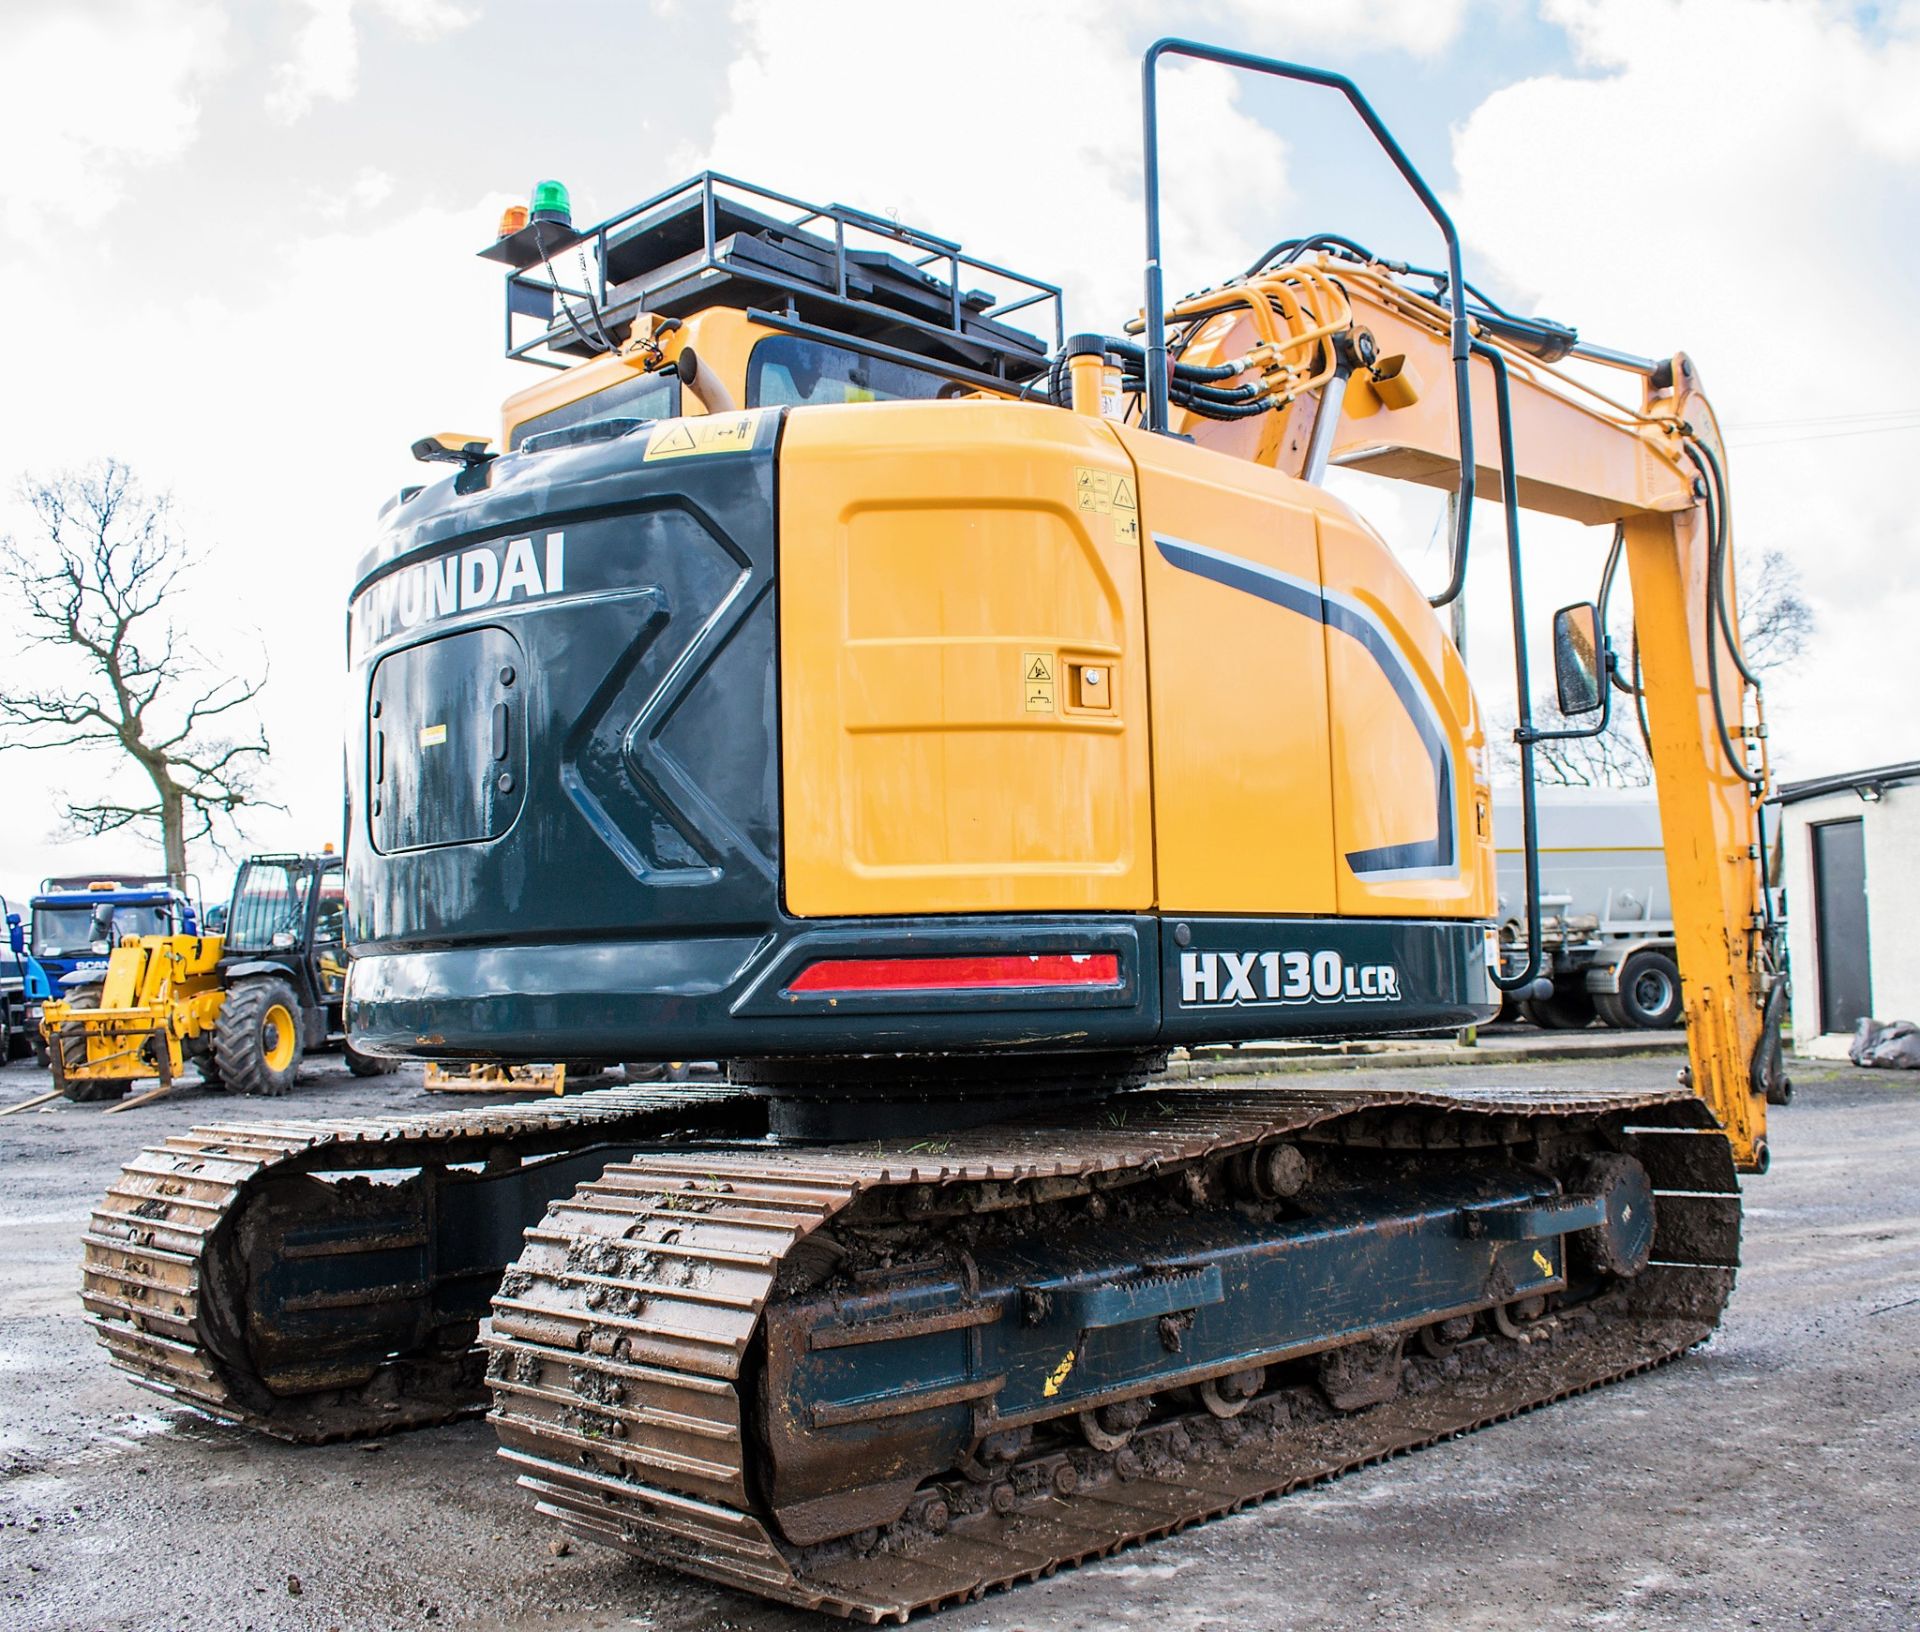 Hyundai HX130 LCR 13 tonne steel tracked excavator Year: 2018 S/N: J0000009 Recorded Hours: 674 - Image 4 of 13